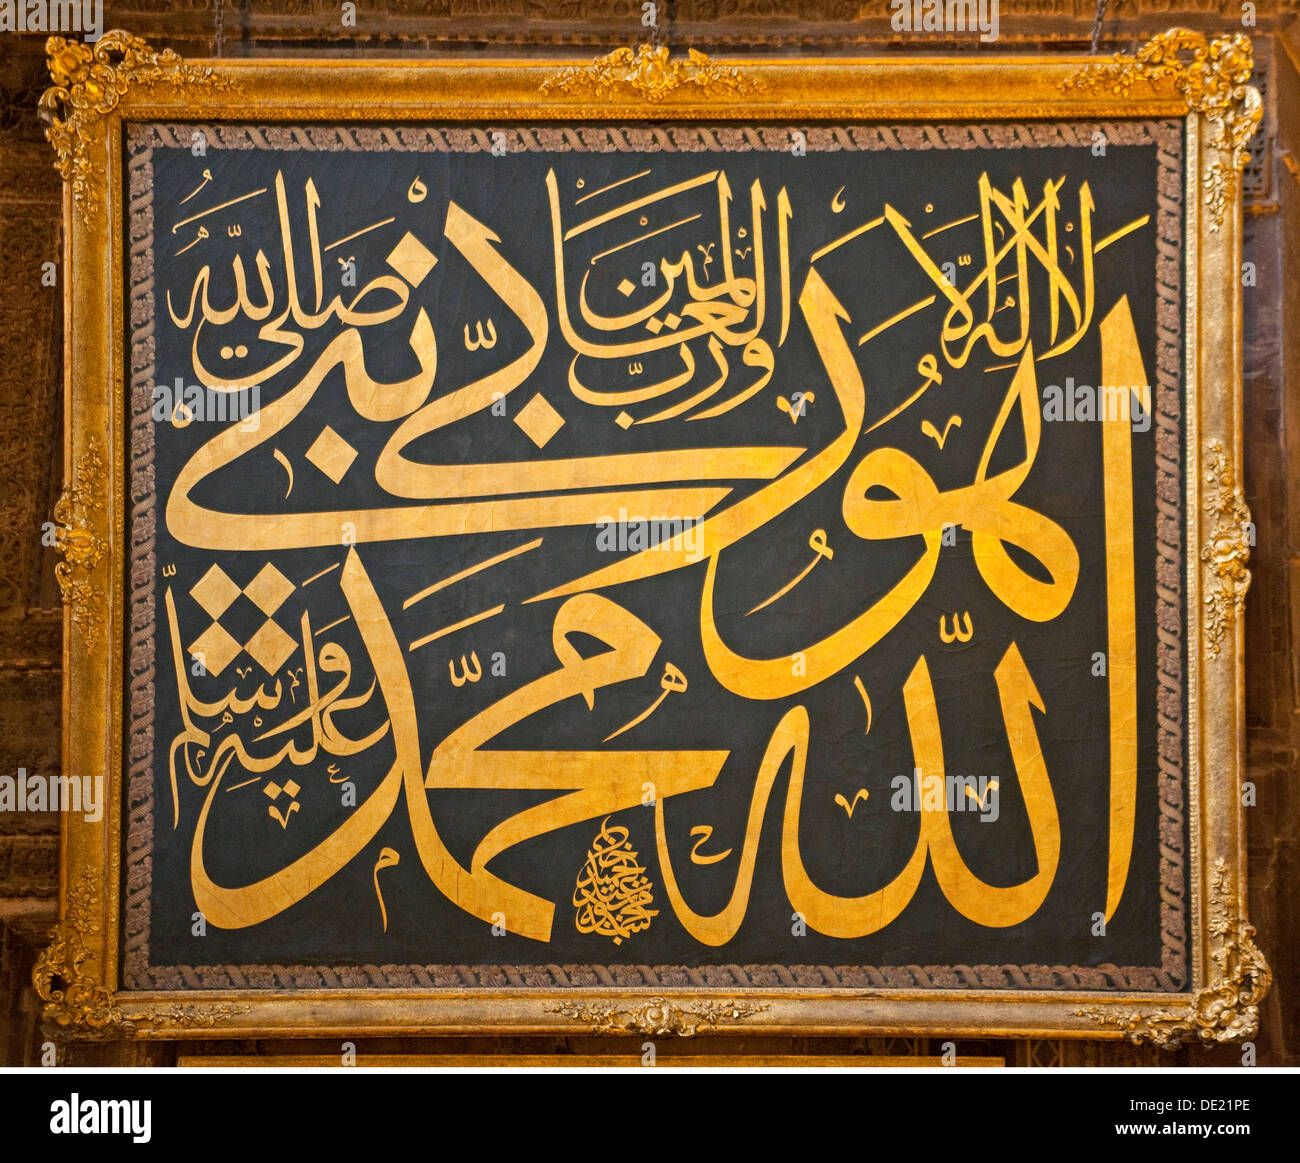 fine arts, Byzantine Empire, calligraphy, Hagia Sophia, Istanbul, Artist's Copyright has not to be cleared Stock Photo